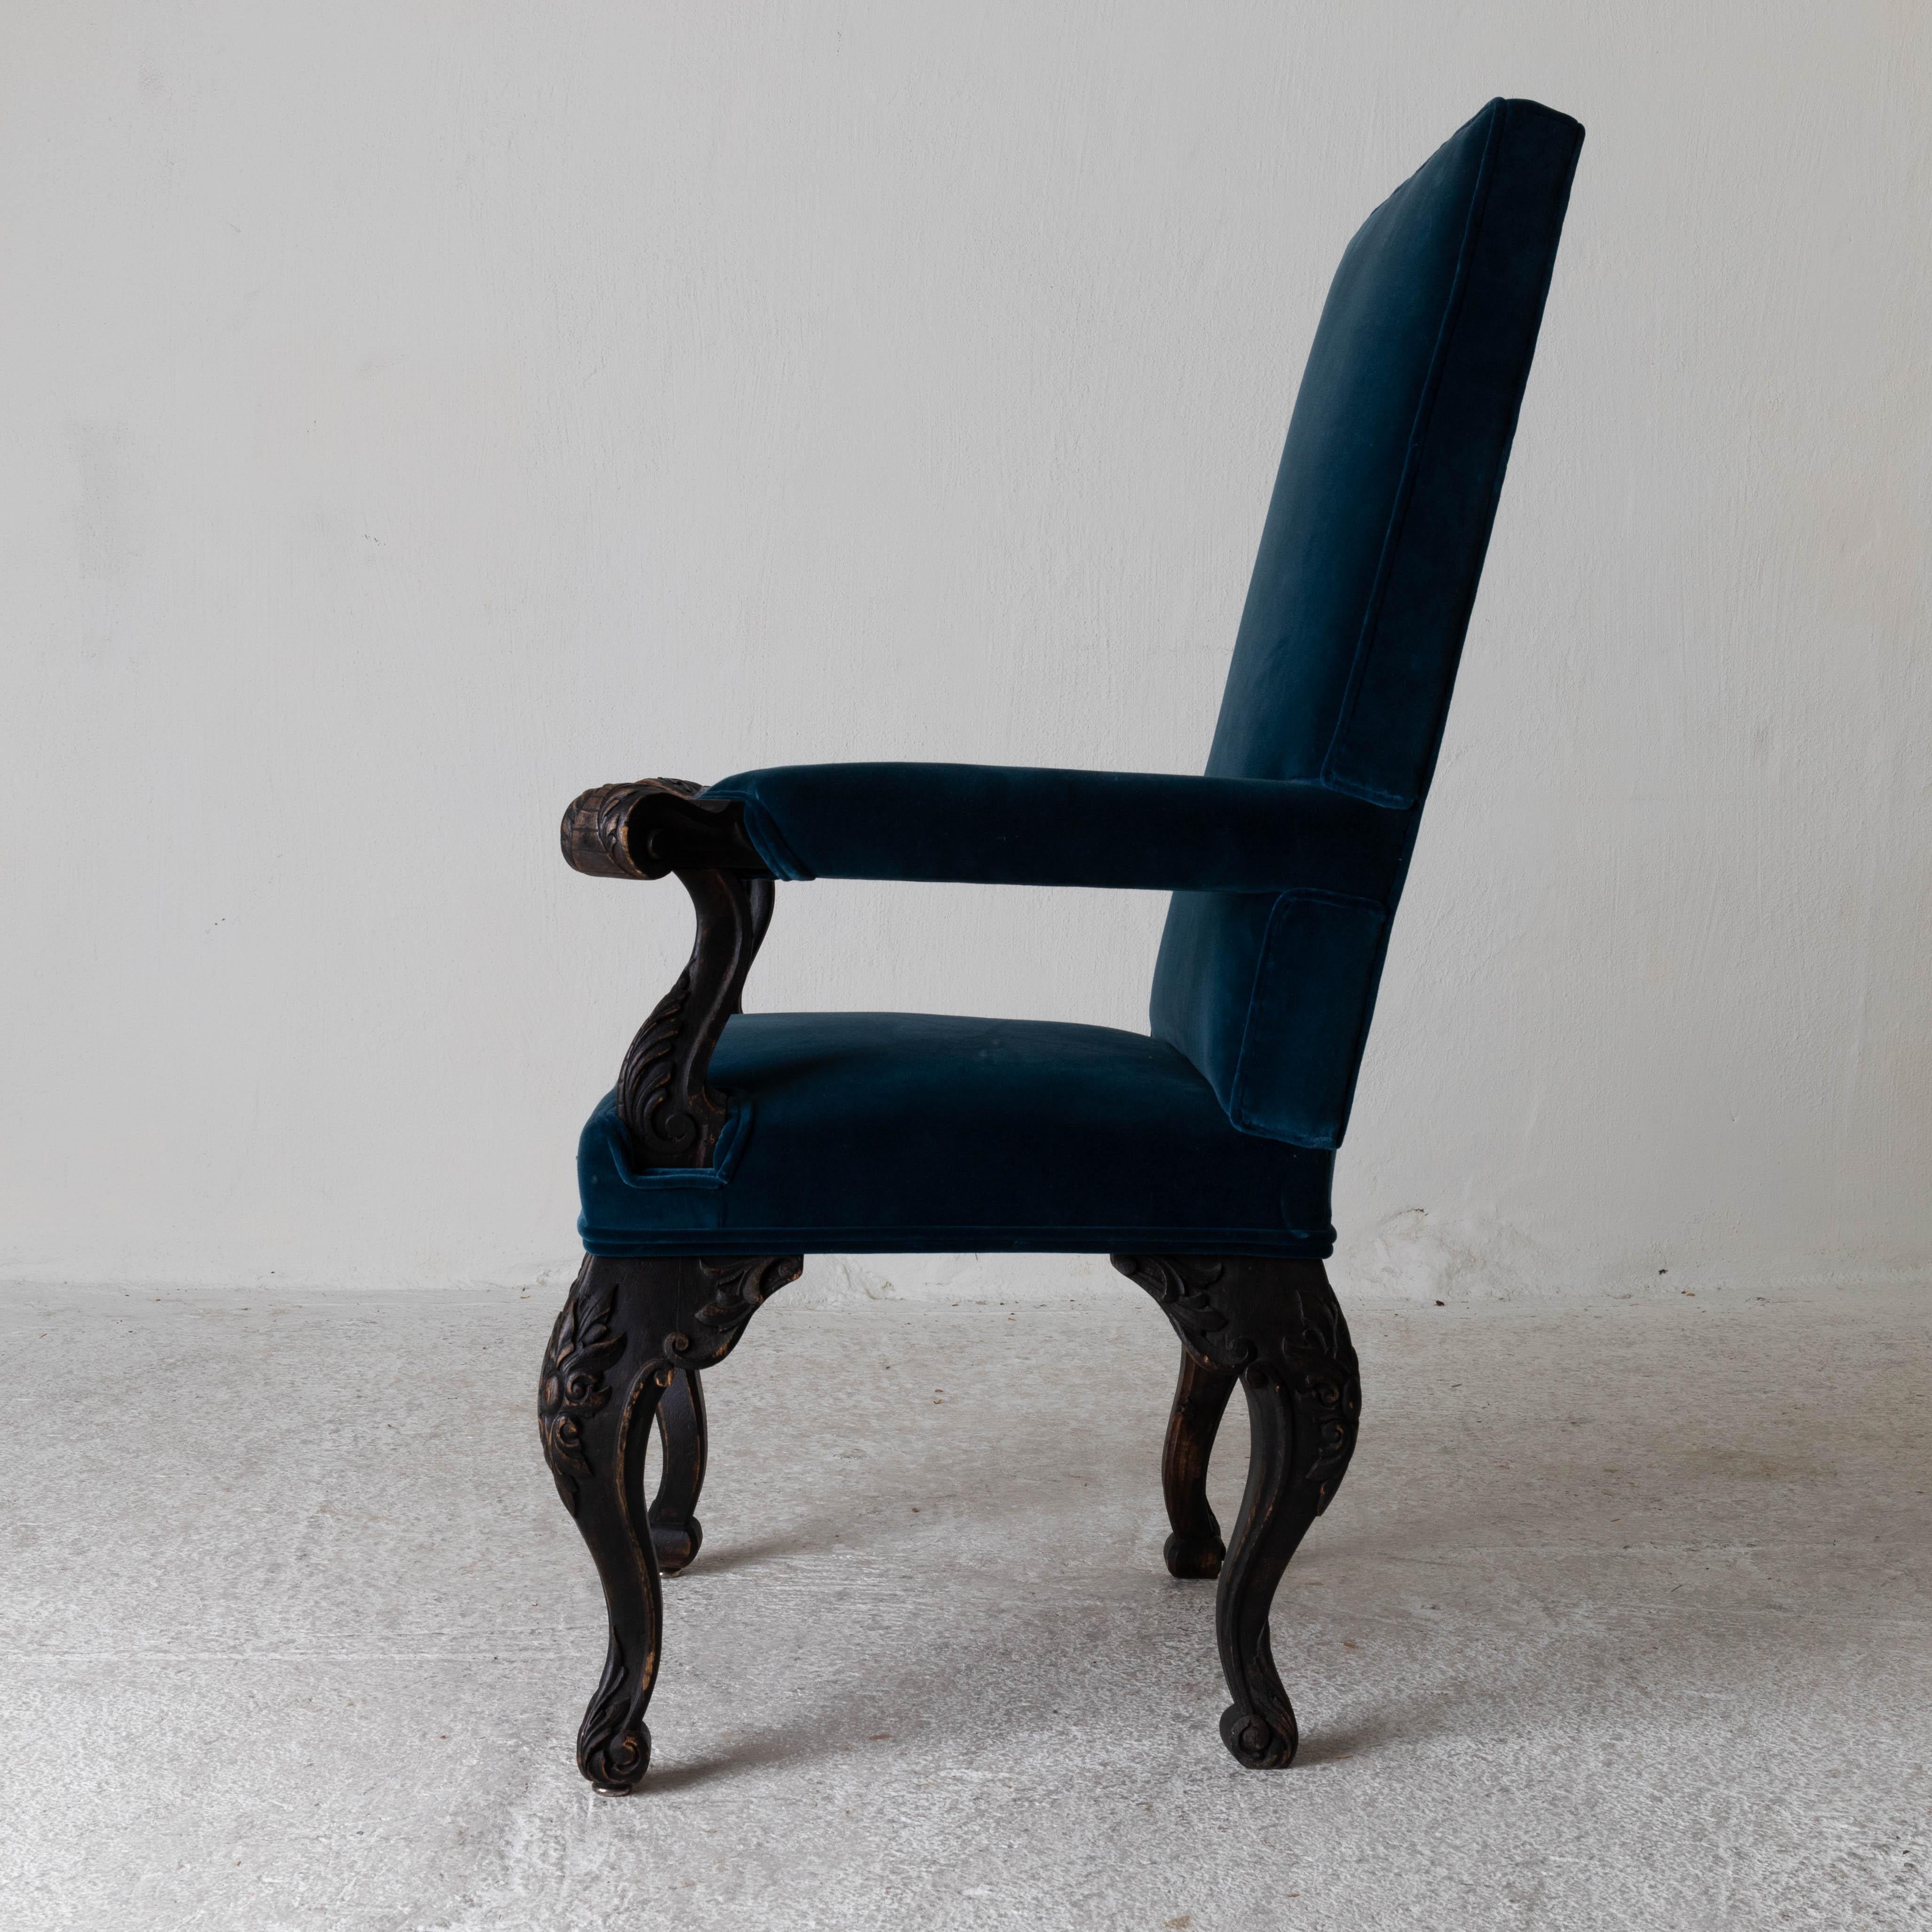 Chair armchair Swedish 19th century black frame blue upholstery Sweden. An armchair made during the 19th century in Sweden. Upholstered in a blue with a green hint cotton velvet. Painted in our Laserow black. Leaf carvings on armrests and legs.

  